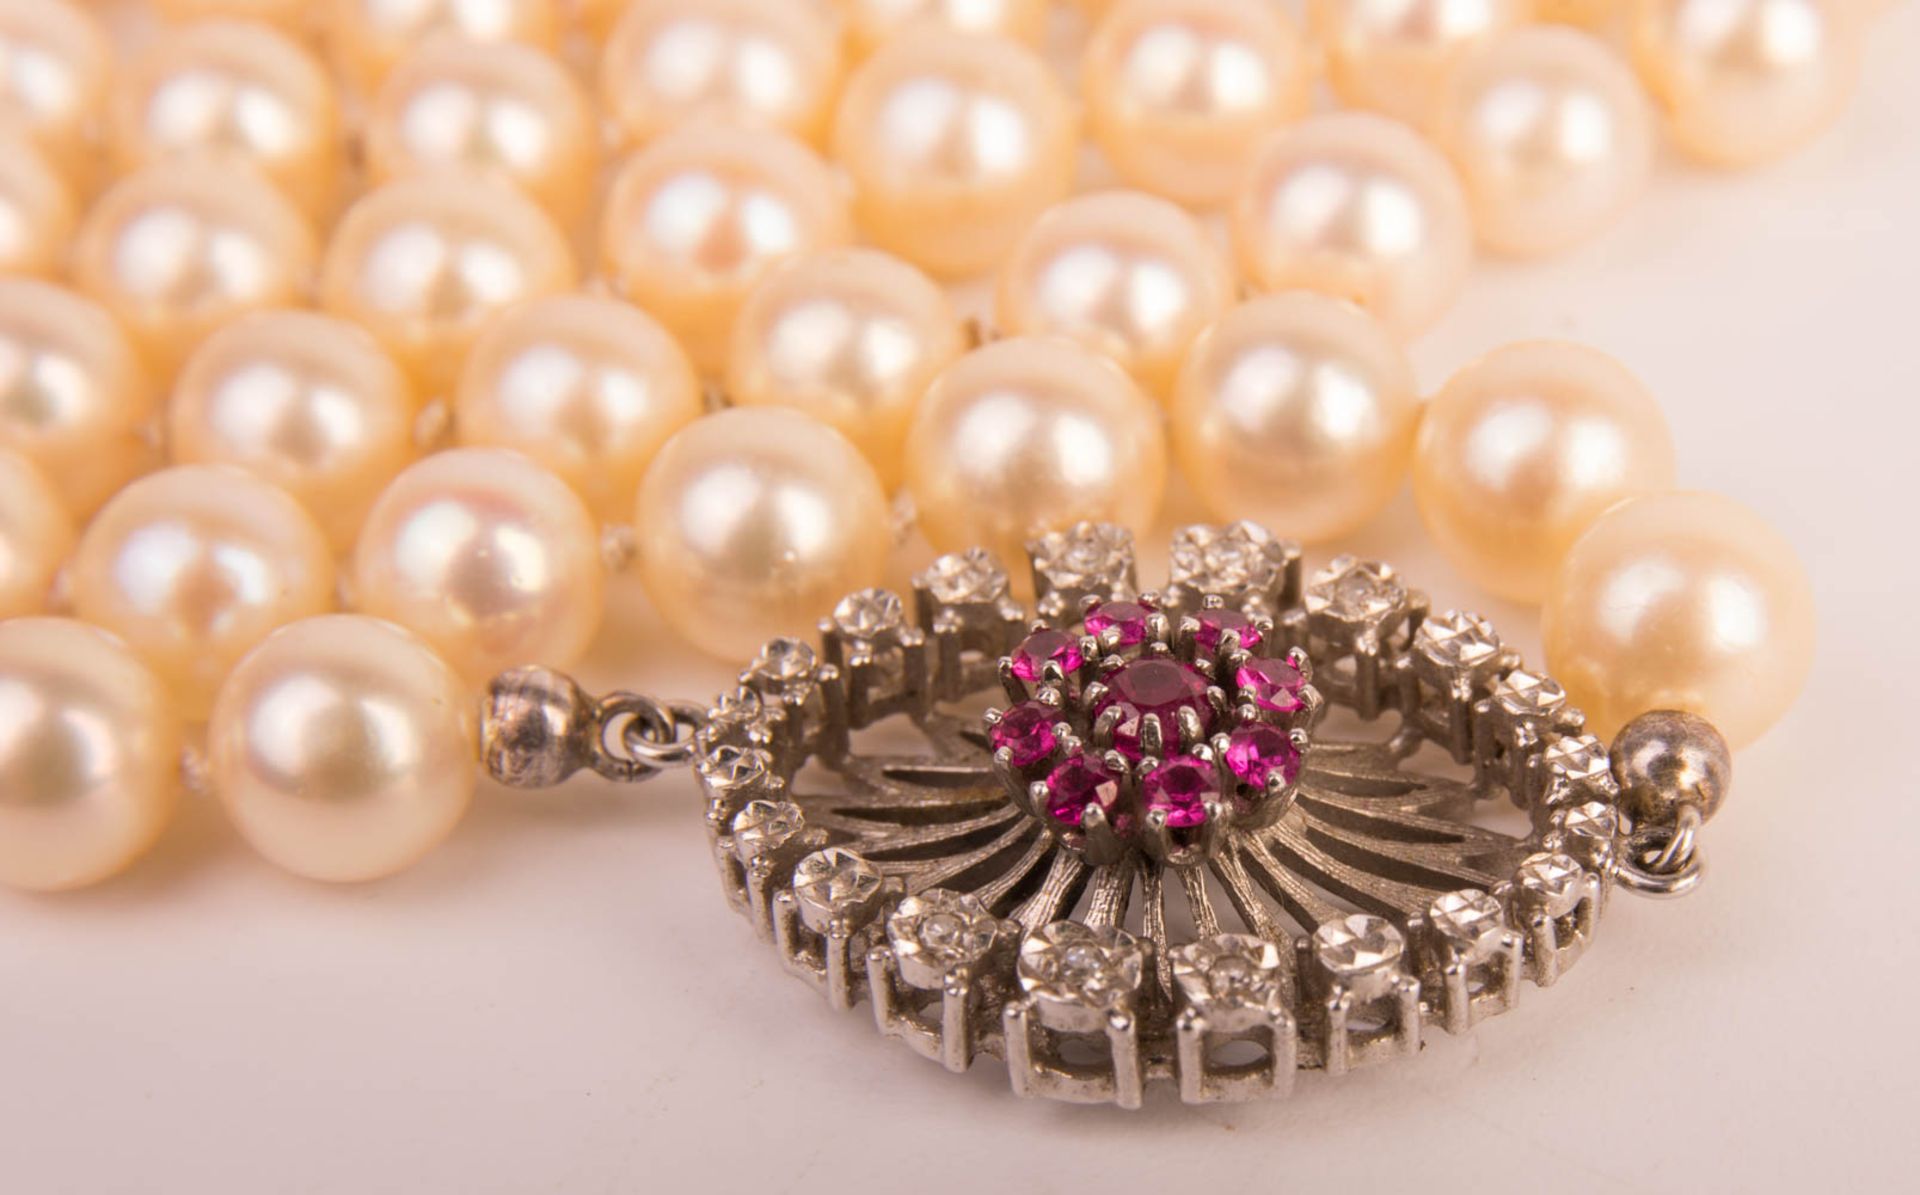 Long pearl necklace with rubies and precious stones. - Image 2 of 3